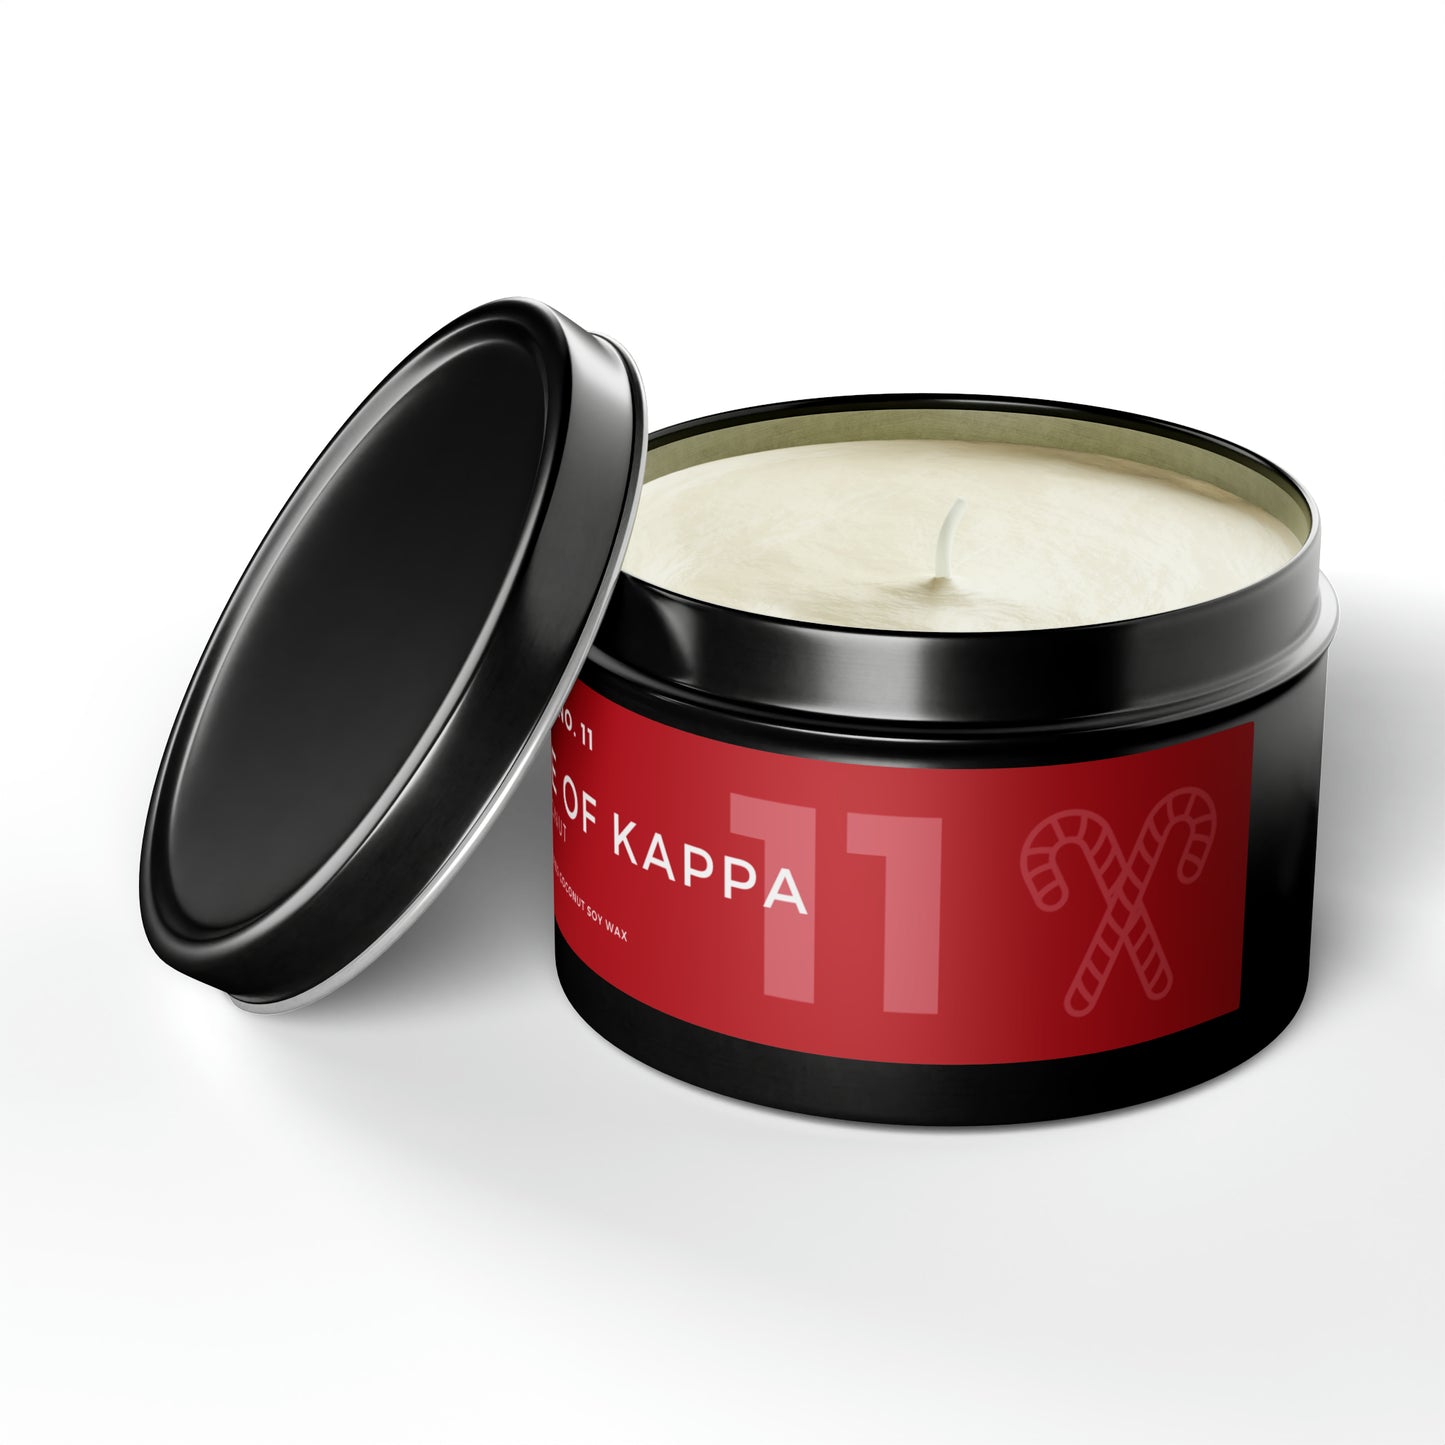 Diggs Krew No. 11 House of Kappa Candle | Mango Coconut